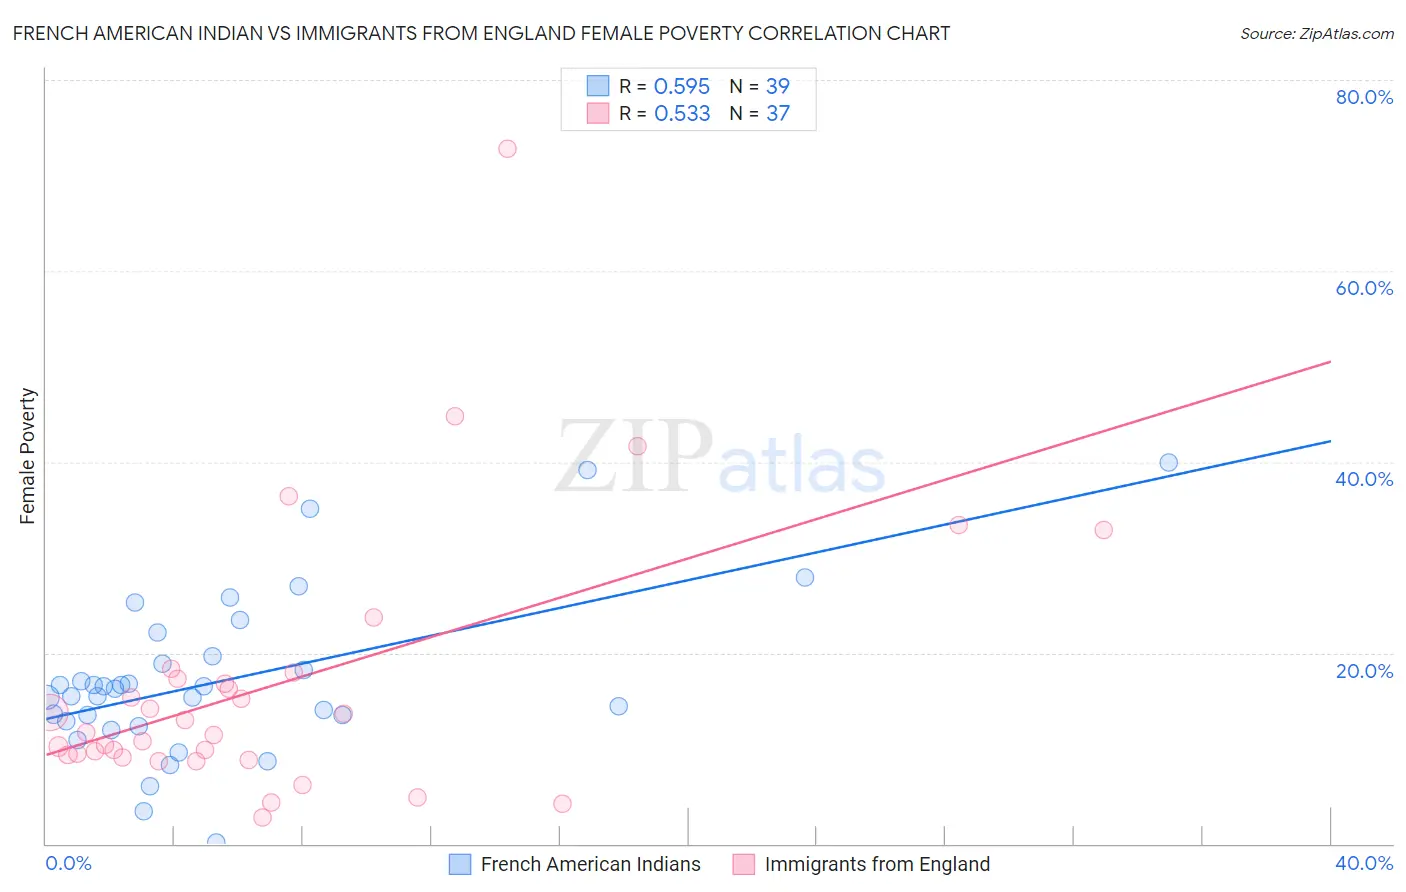 French American Indian vs Immigrants from England Female Poverty